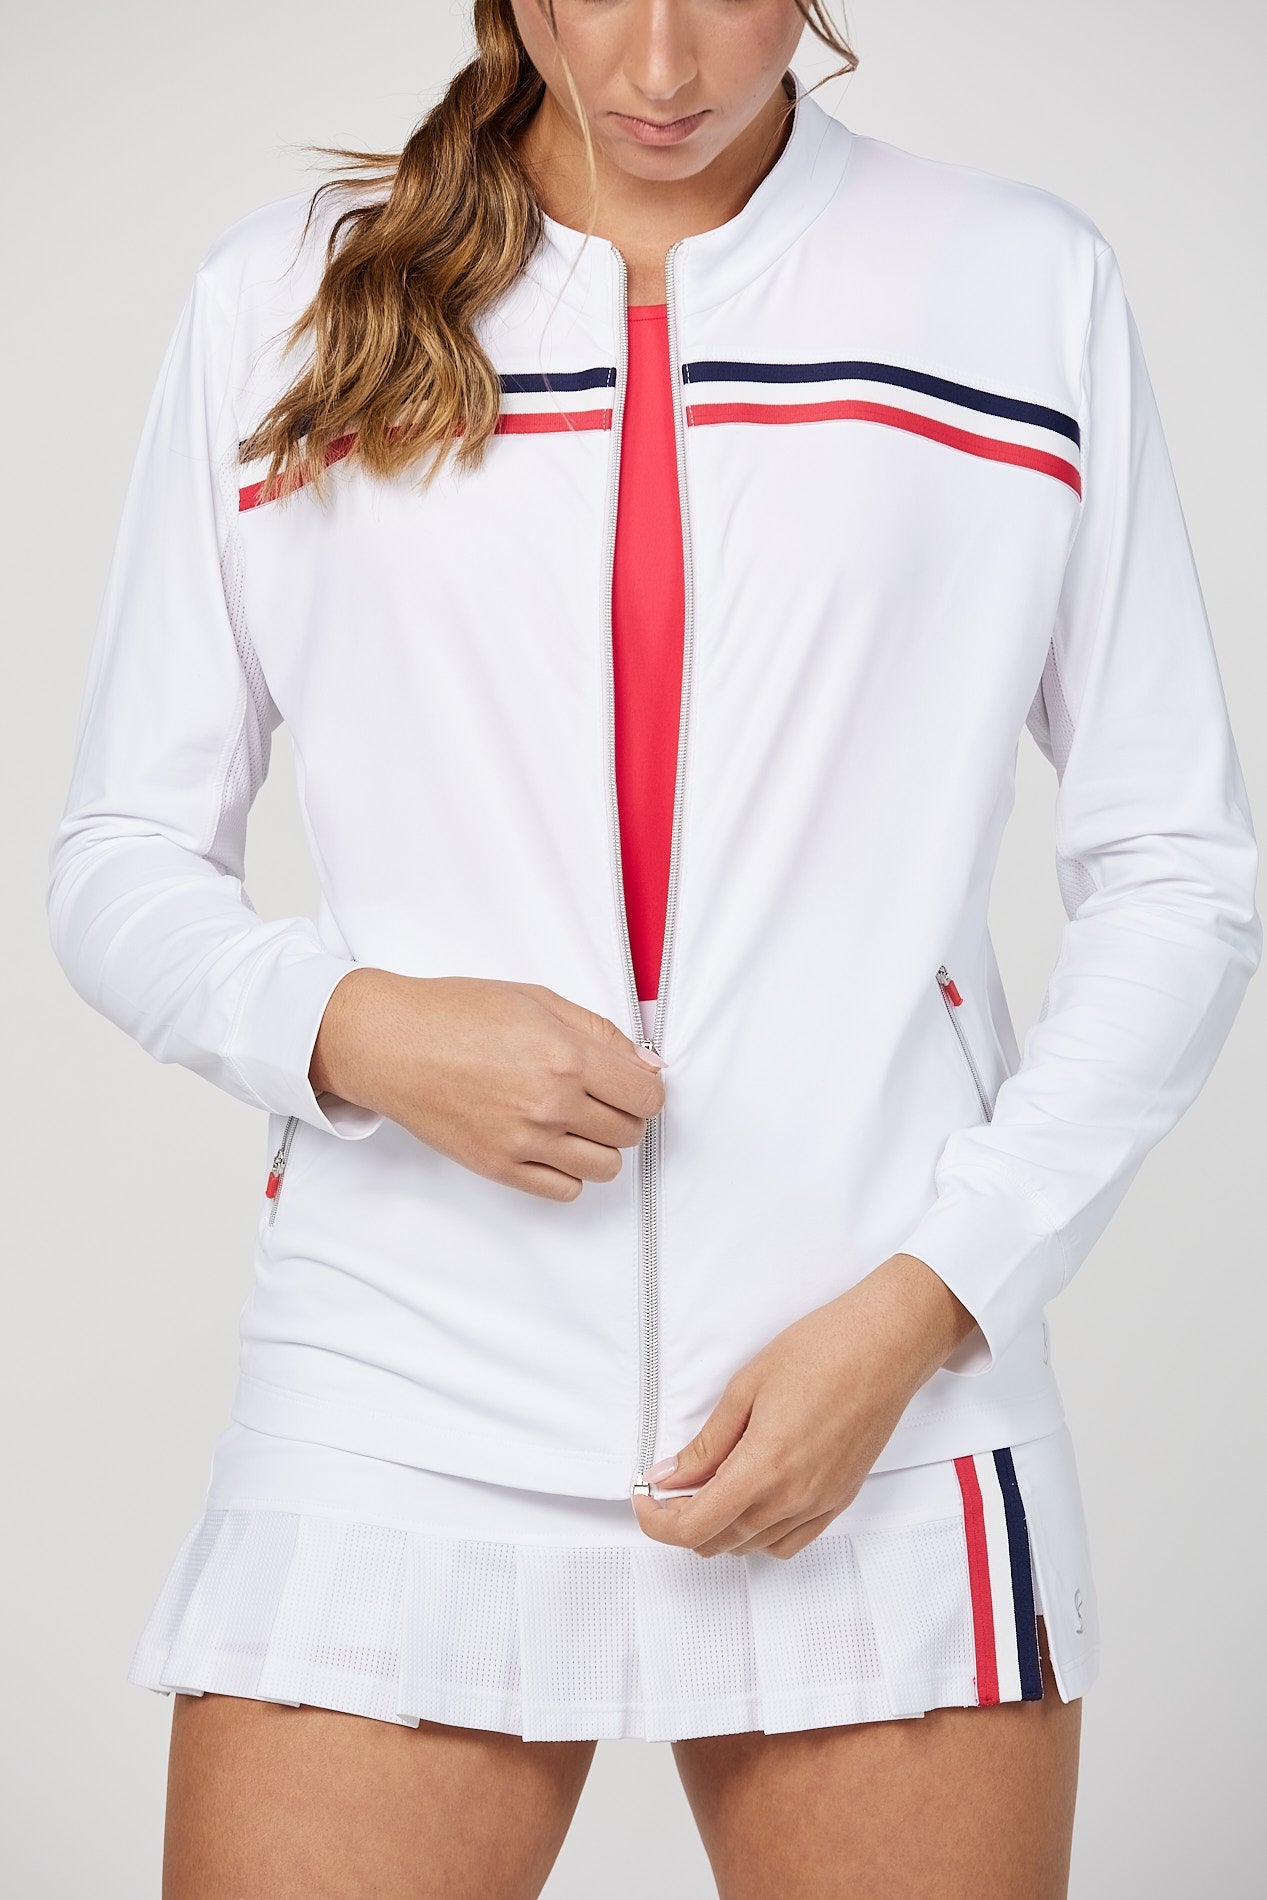 Women's White Zipper Golf Jacket with Mesh Sleeve Inserts by Sofibella, zoom view of front